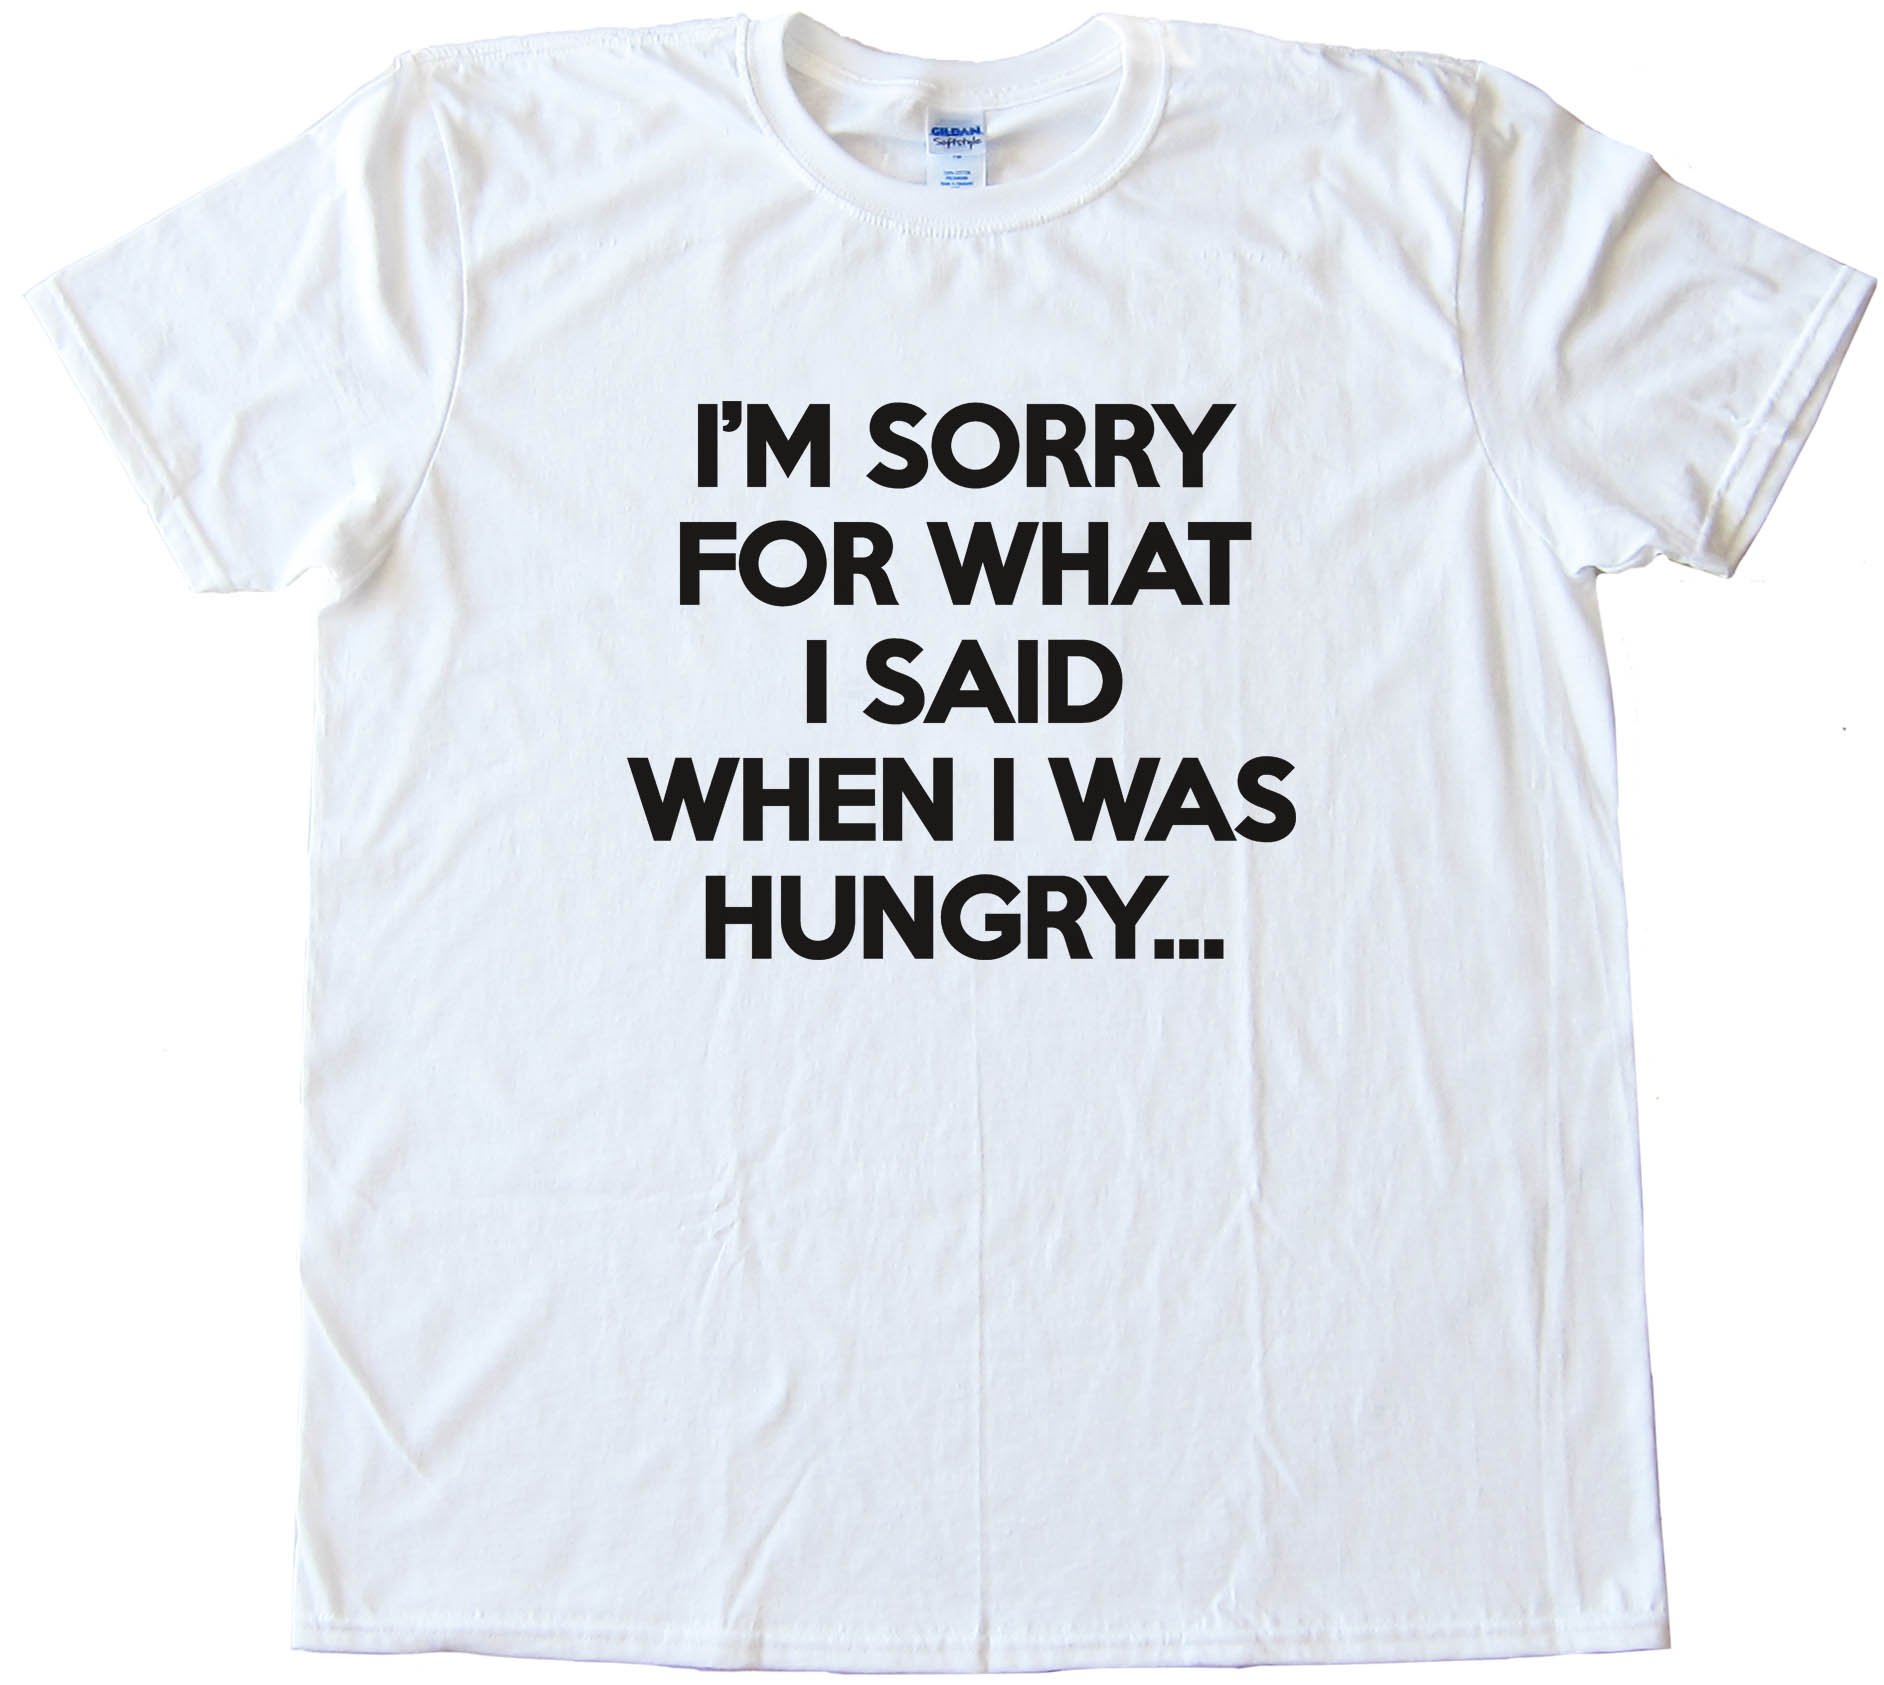 I'M Sorry For What I Said When I Was Hungry Tee Shirt